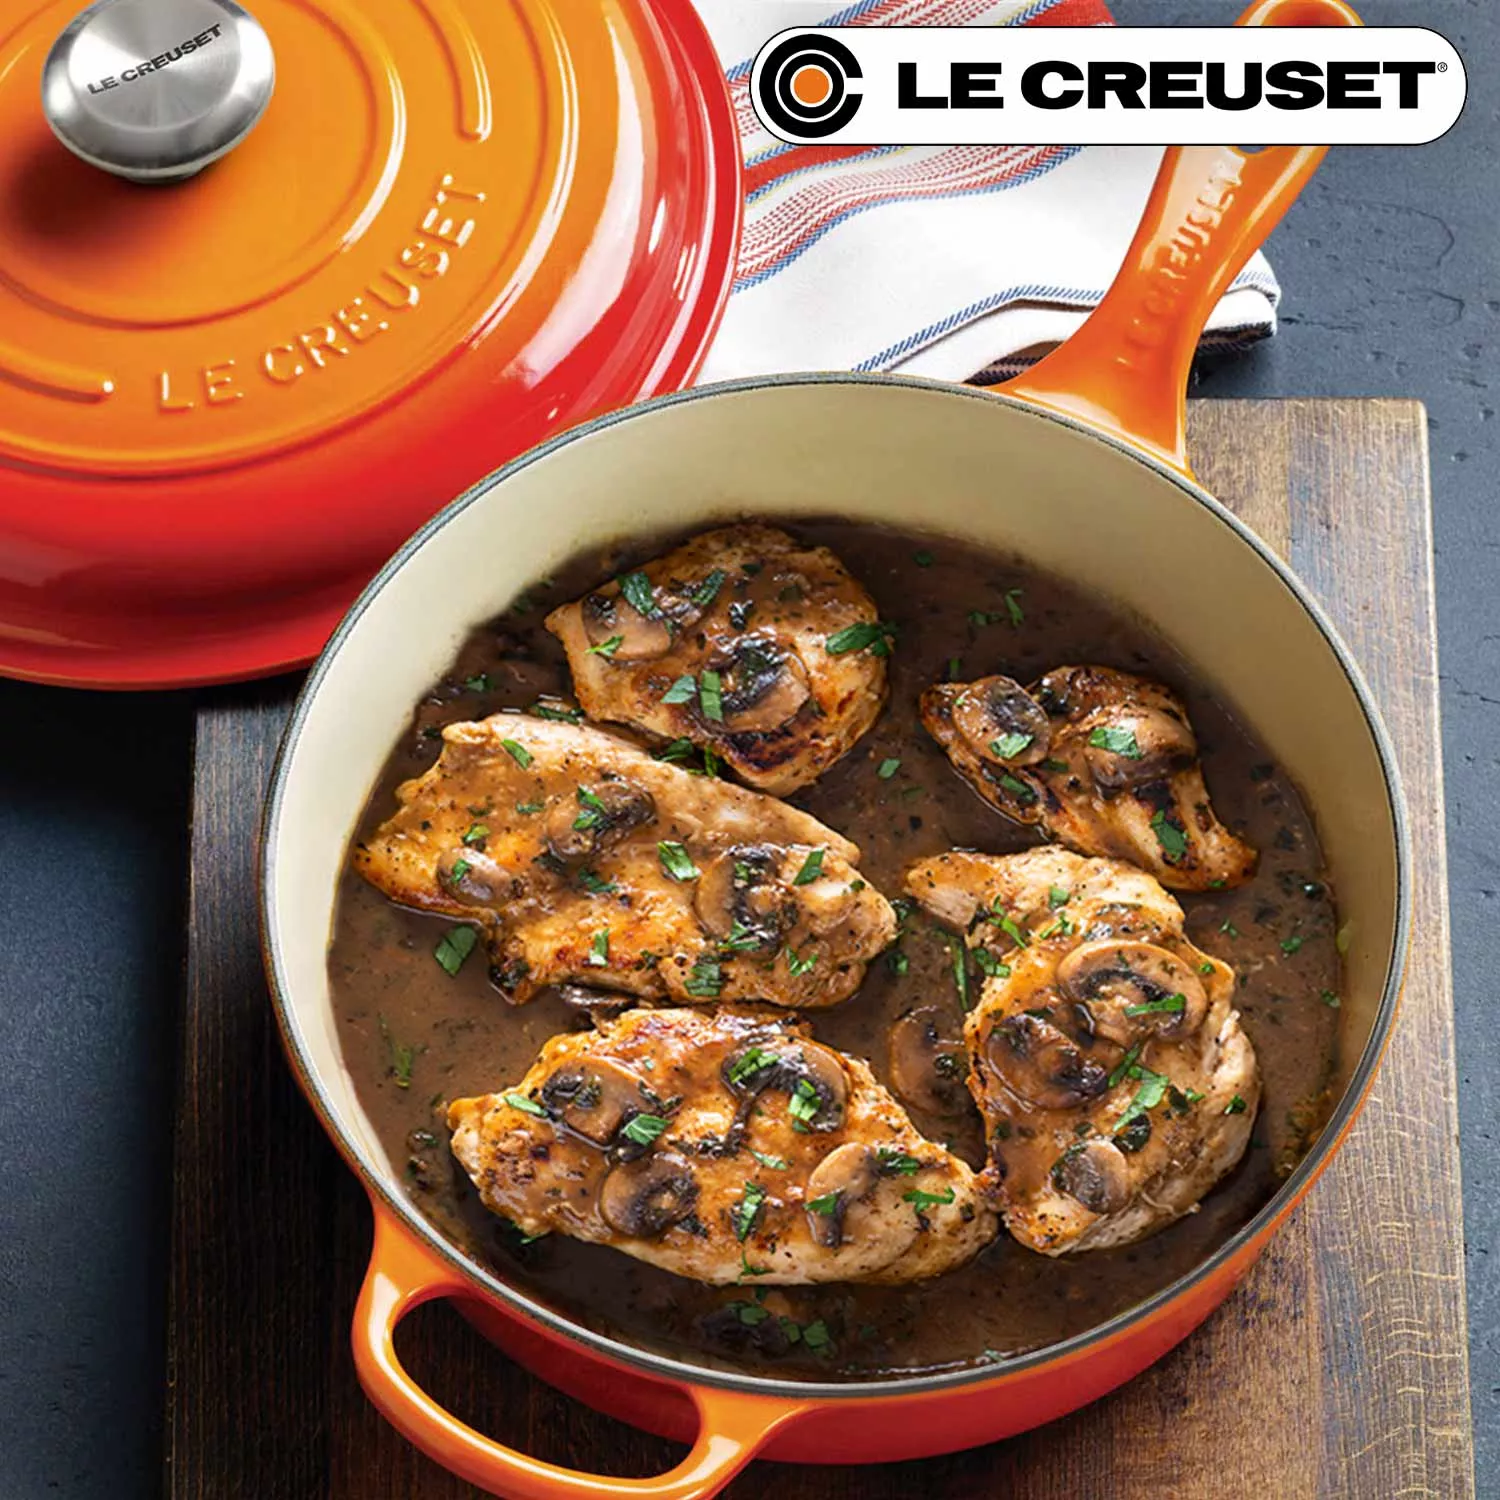 Le Creuset Other Kitchen & Dining